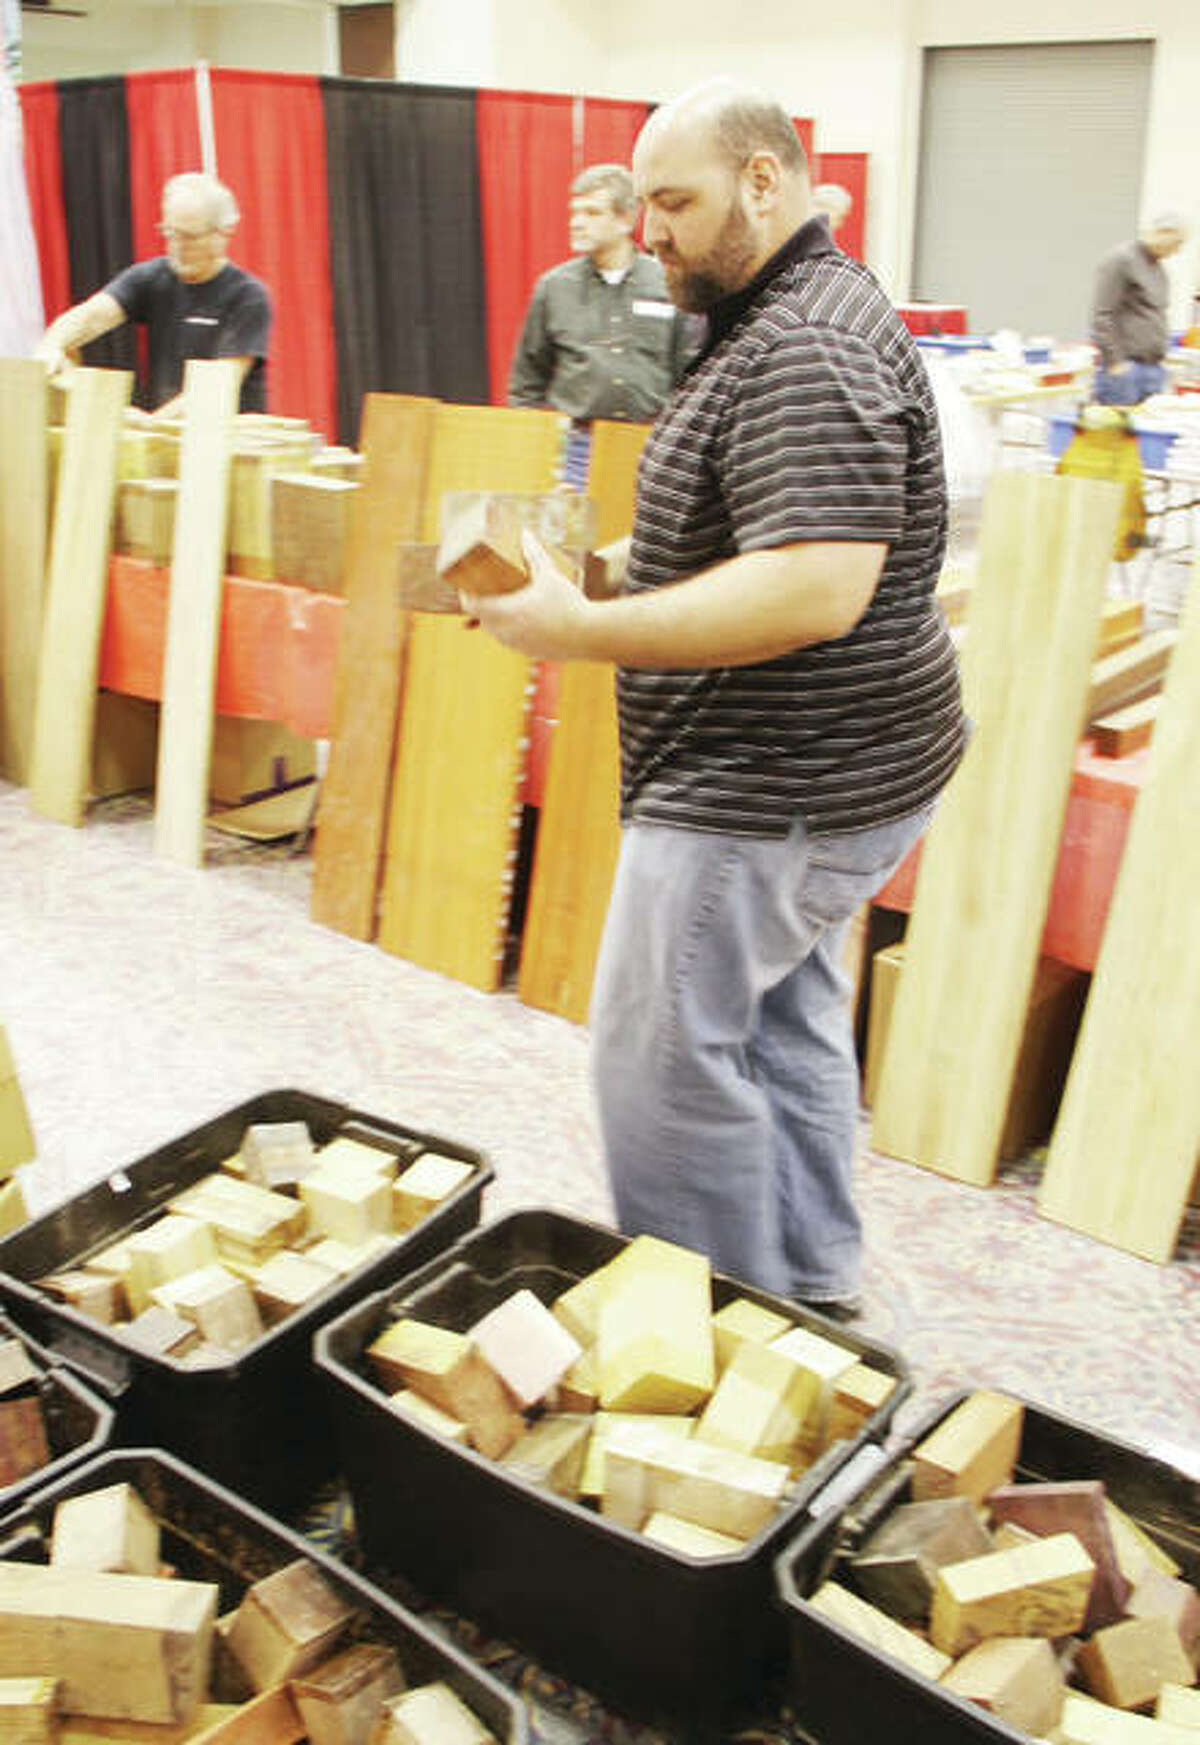 Woodworking show expected to draw thousands to Gateway Center this weekend